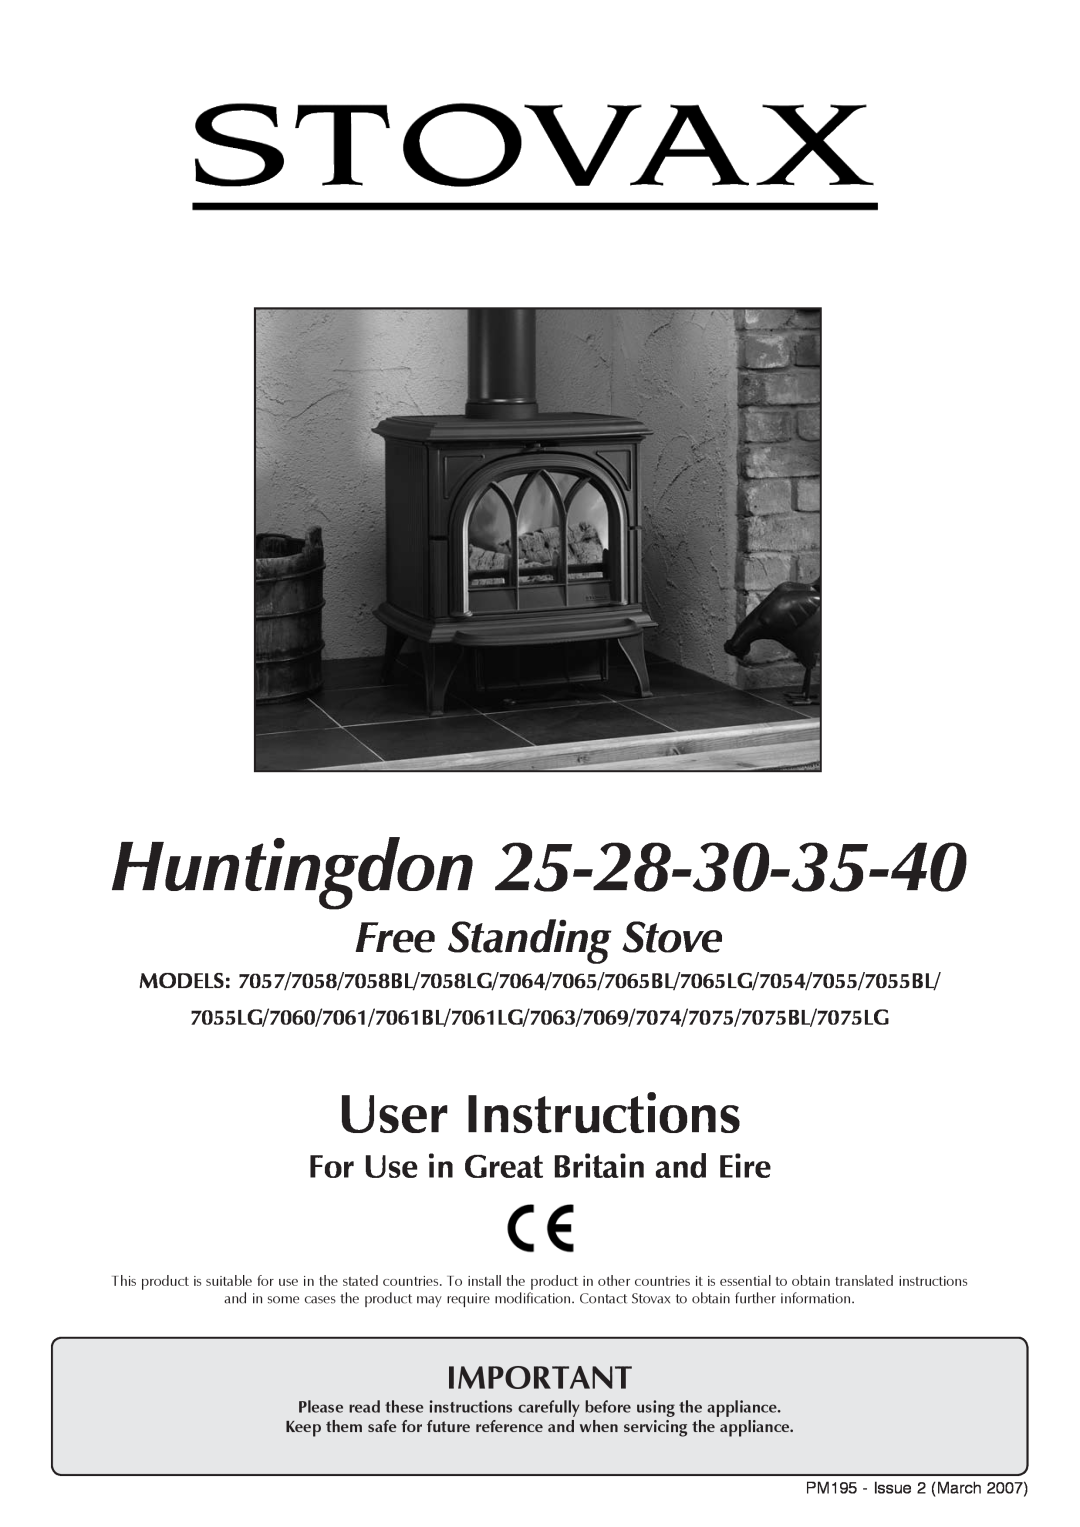 Stovax 7061lG, 7057, 7074, 7058 manual Huntingdon, User Instructions, Free Standing Stove, For Use in Great Britain and Eire 